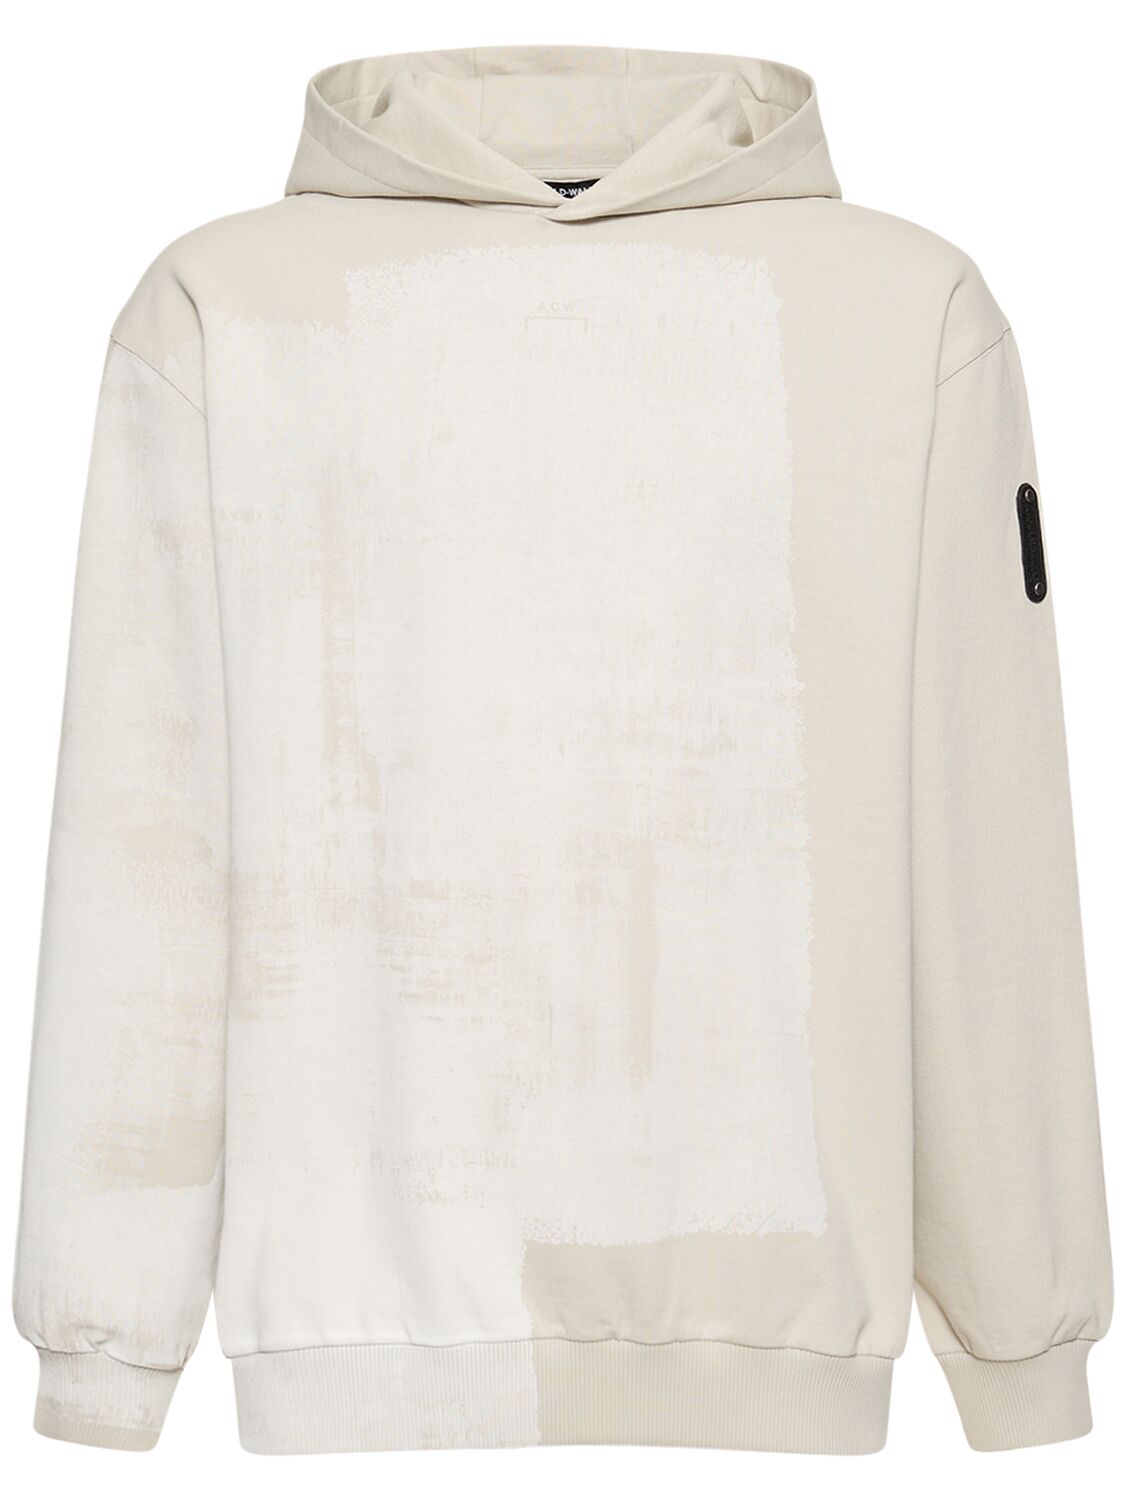 A-COLD-WALL* BRUSHSTROKE COTTON FRENCH TERRY HOODIE